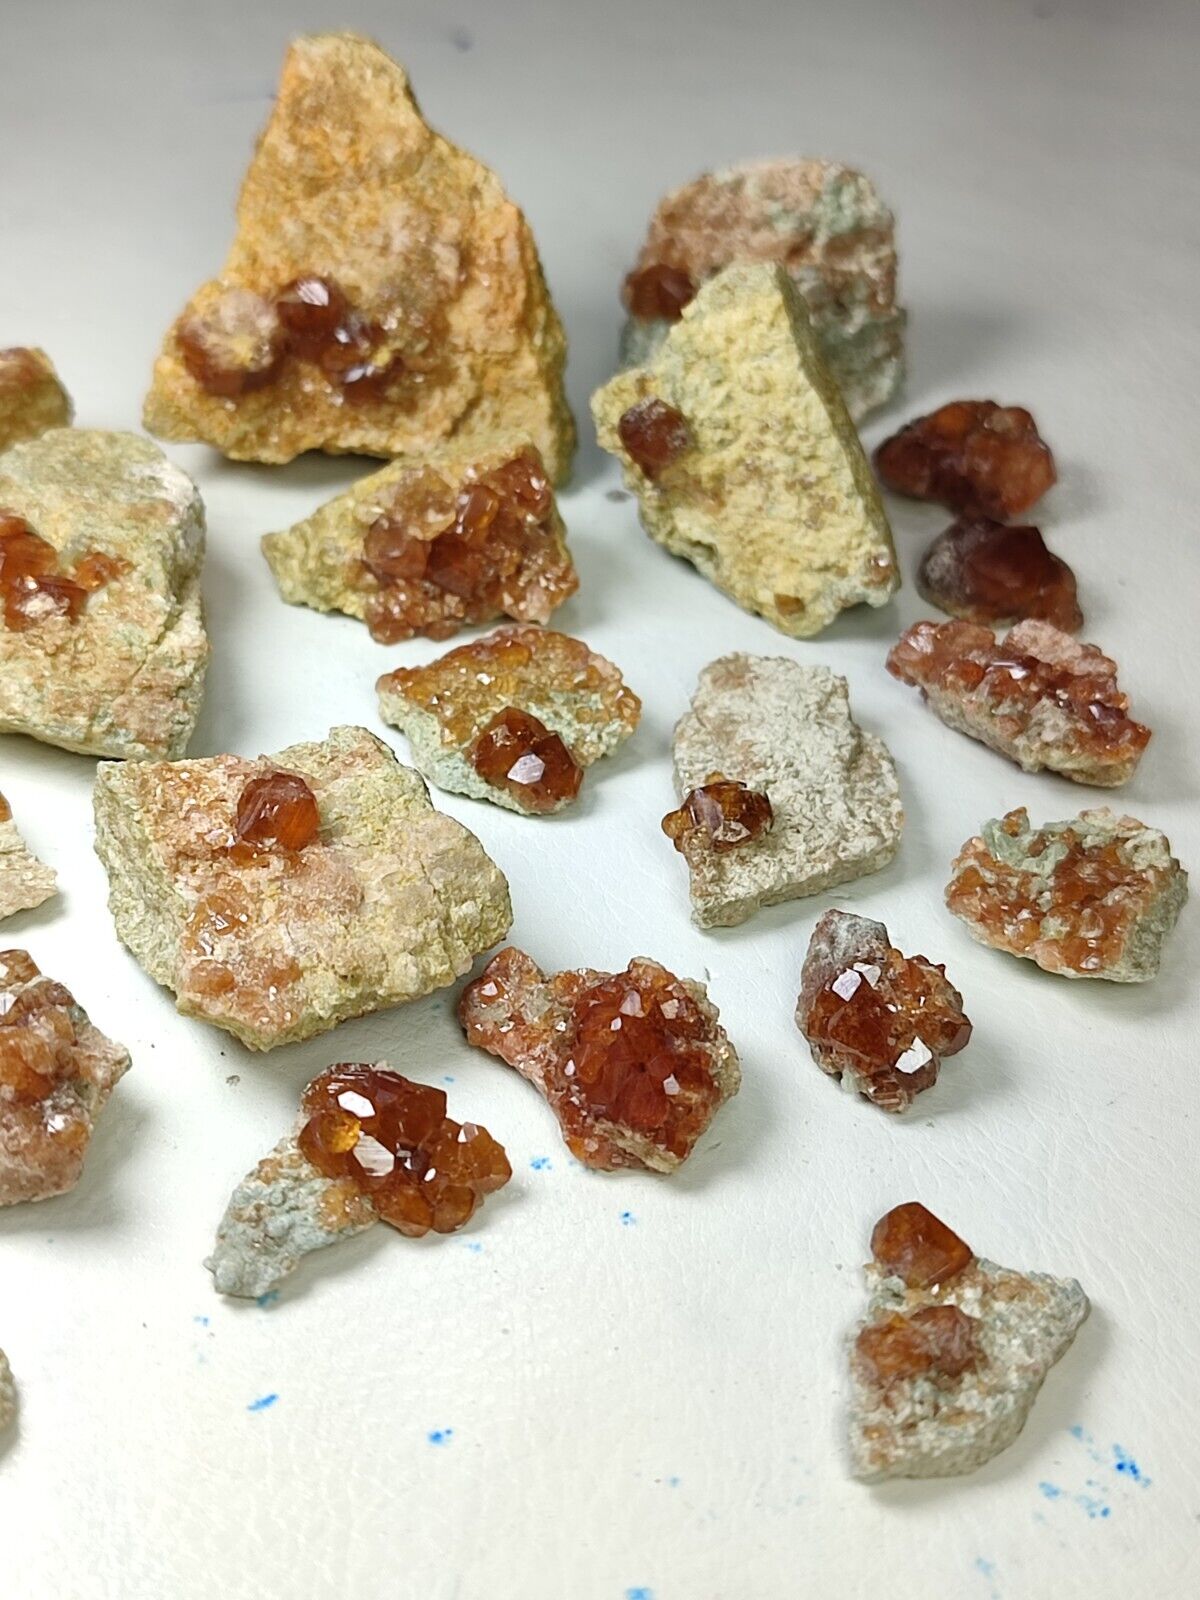 Hessonite Garnet Gemmy Crystals/Specimens With Good Luster & Nice Terminations.